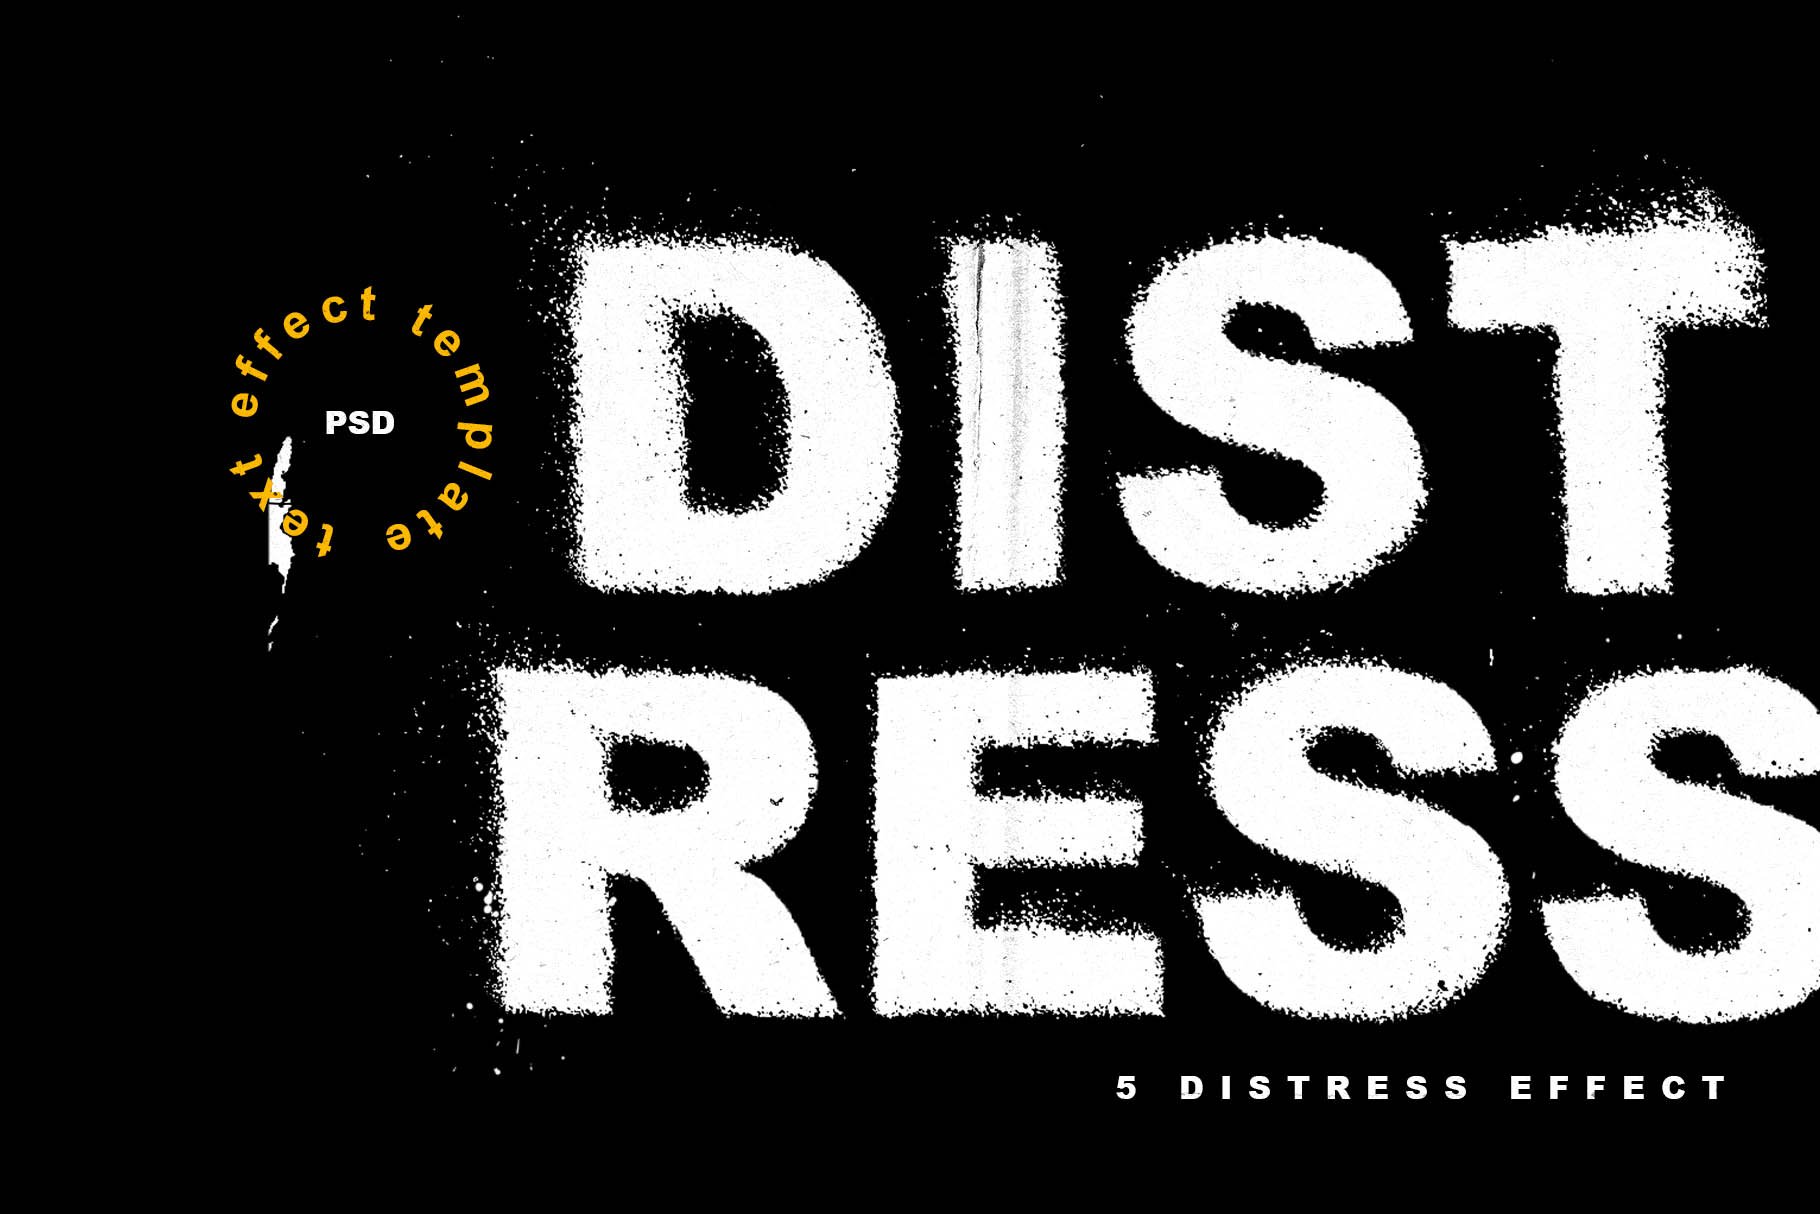 Distress Damage Text Effect Templatecover image.